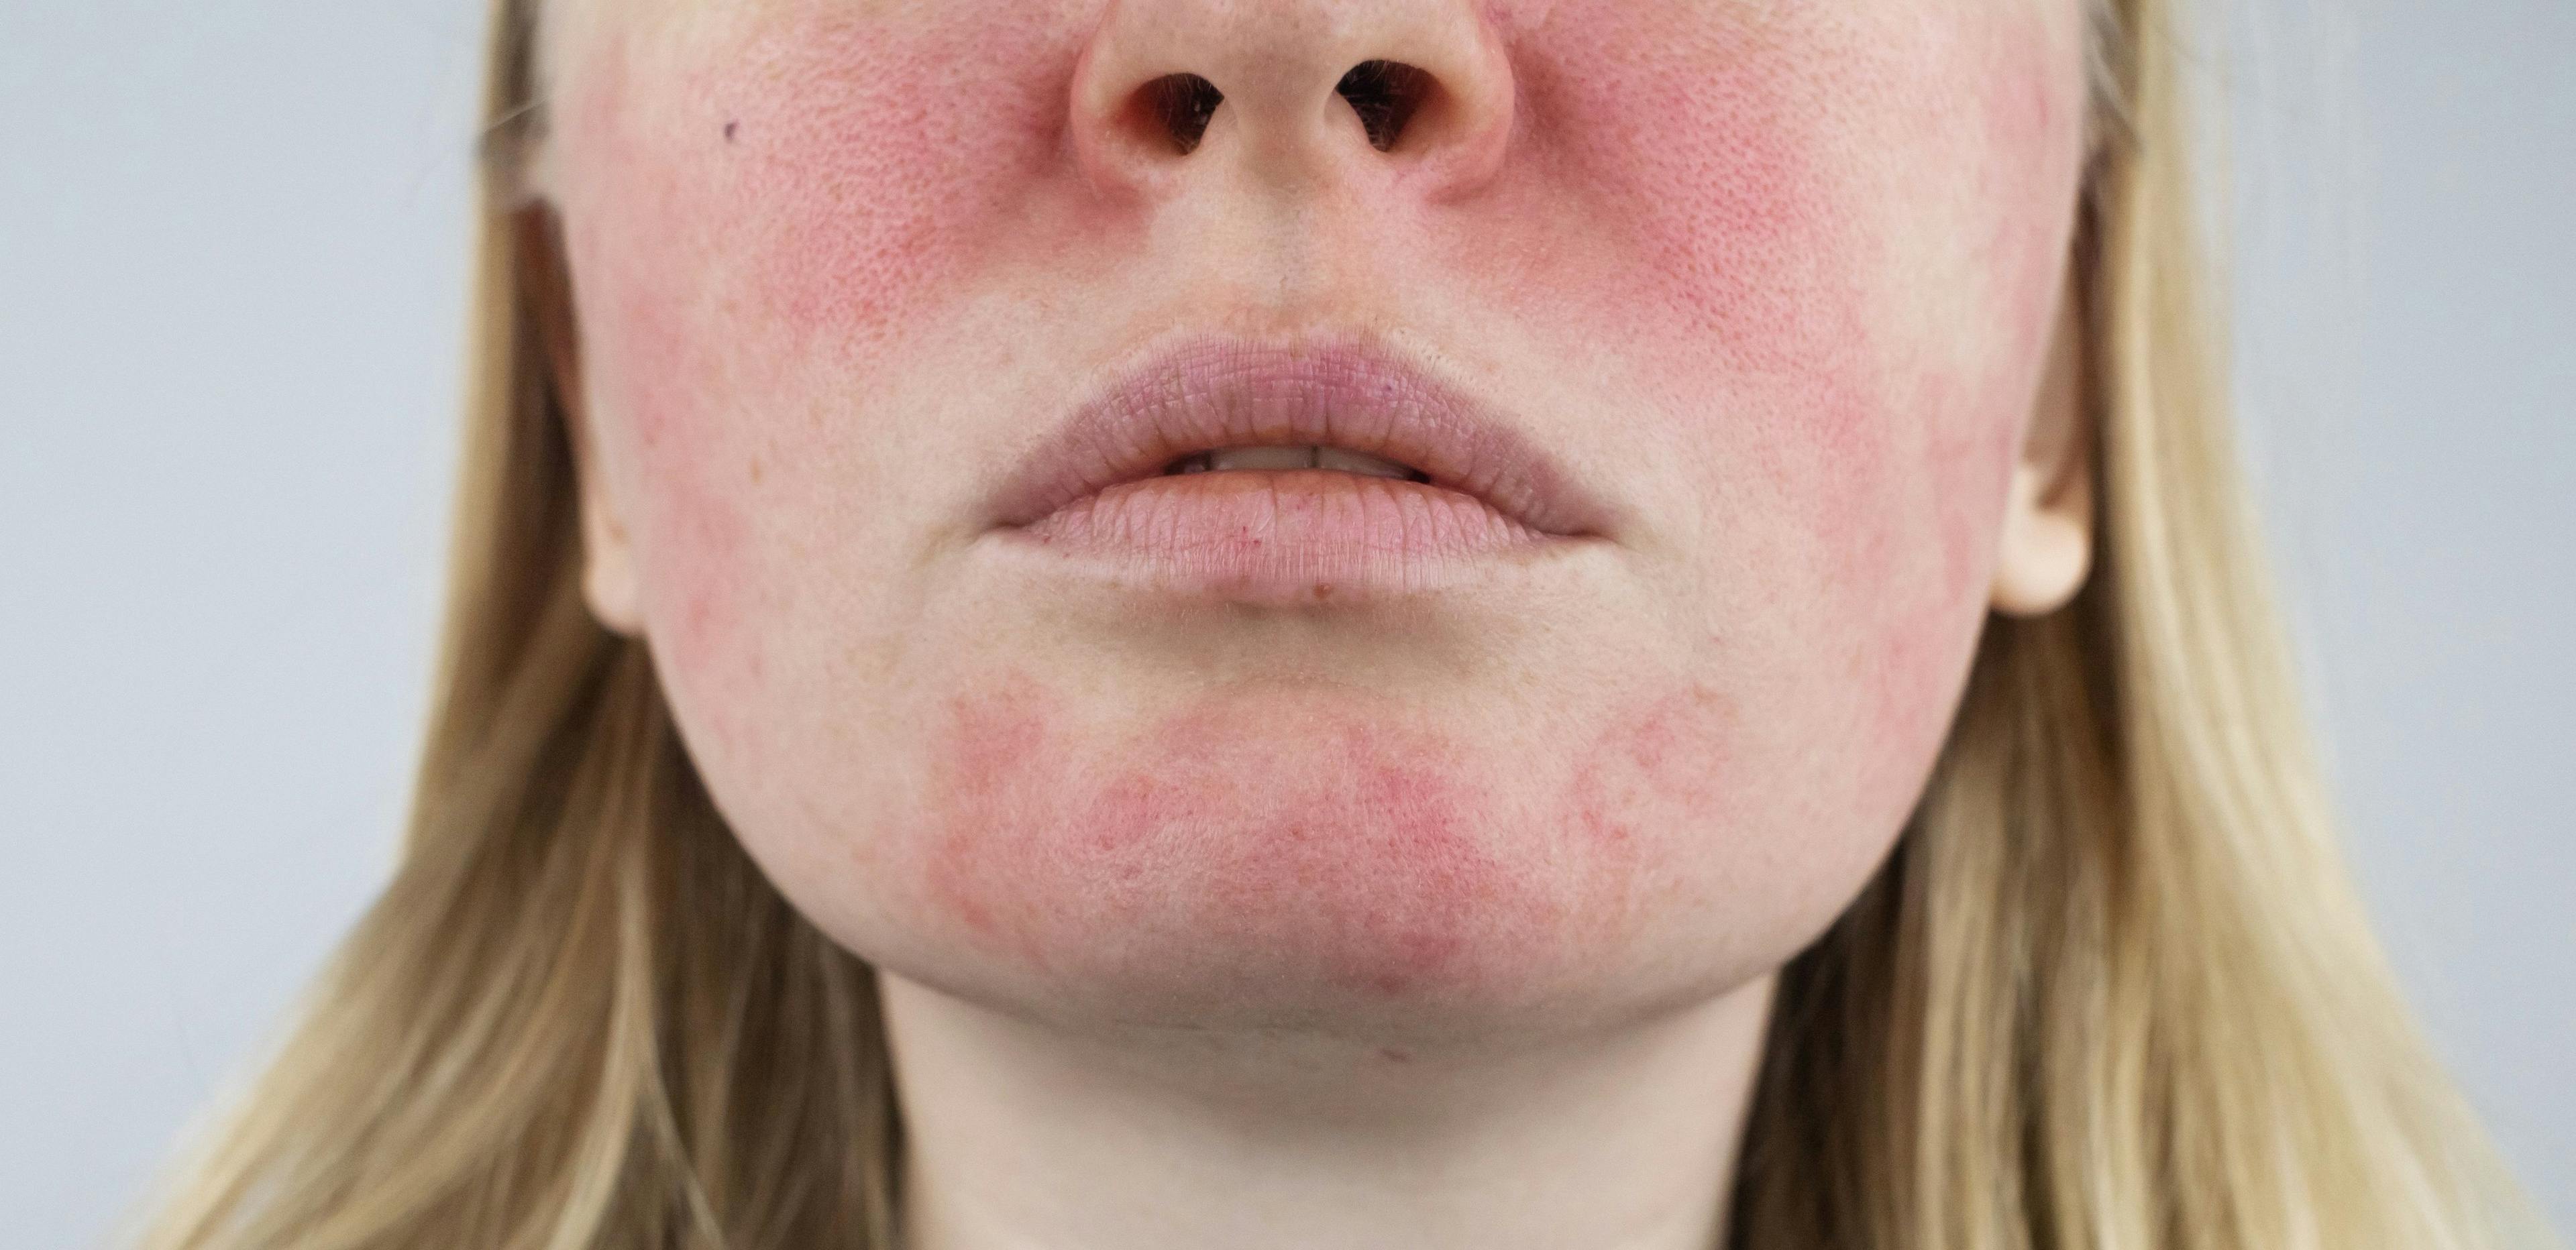 Close up view of woman with rosacea on the cheeks and face